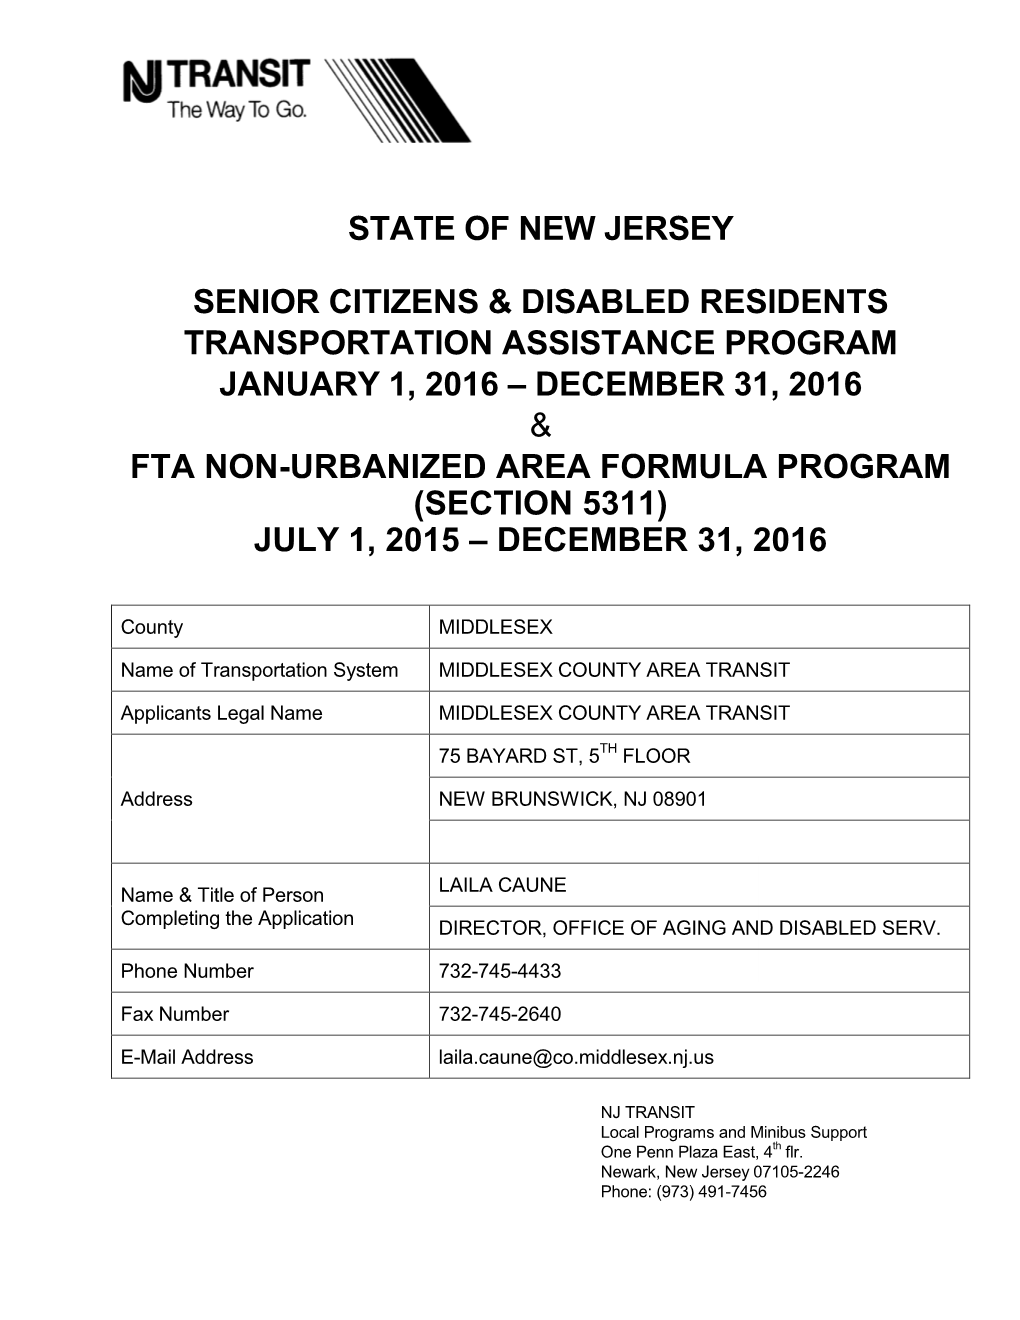 State of New Jersey Senior Citizens & Disabled